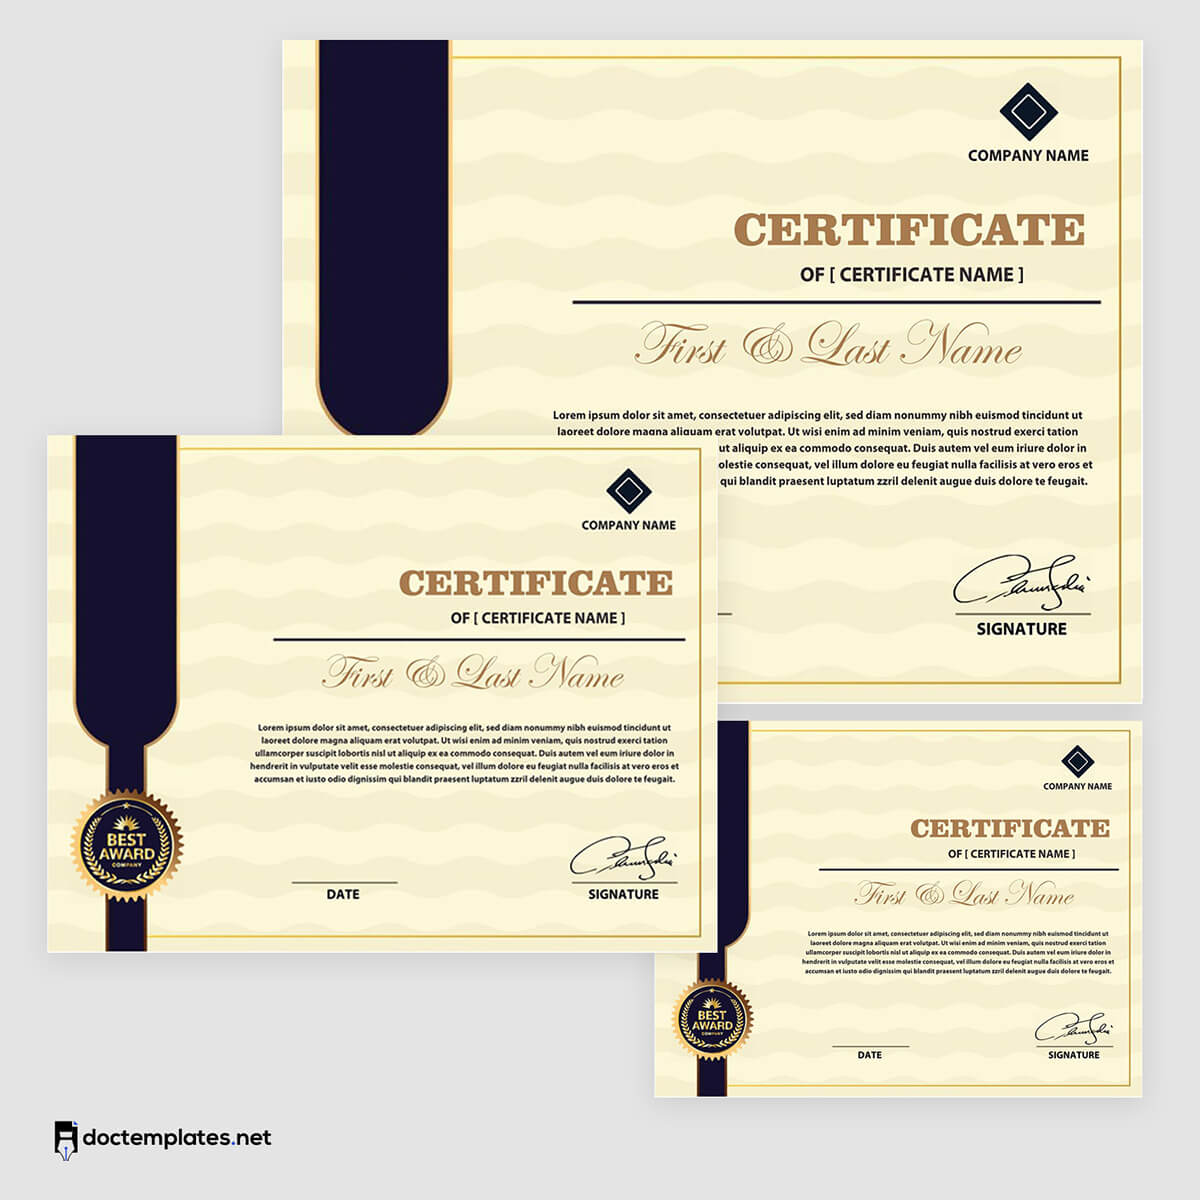 
professional certificate templates - free download
